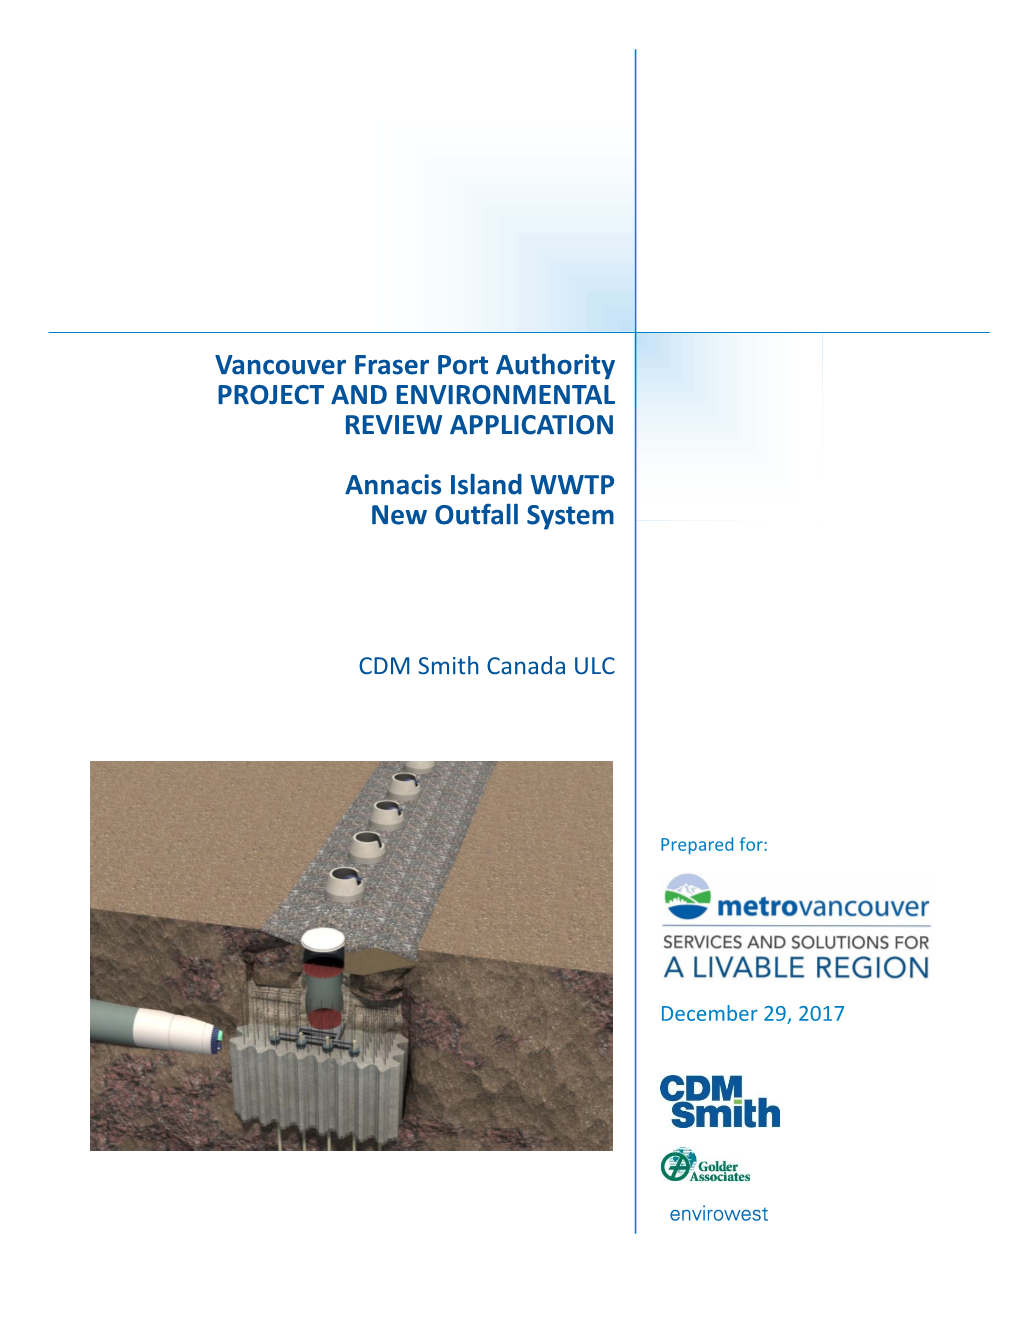 Vancouver Fraser Port Authority PROJECT and ENVIRONMENTAL REVIEW APPLICATION